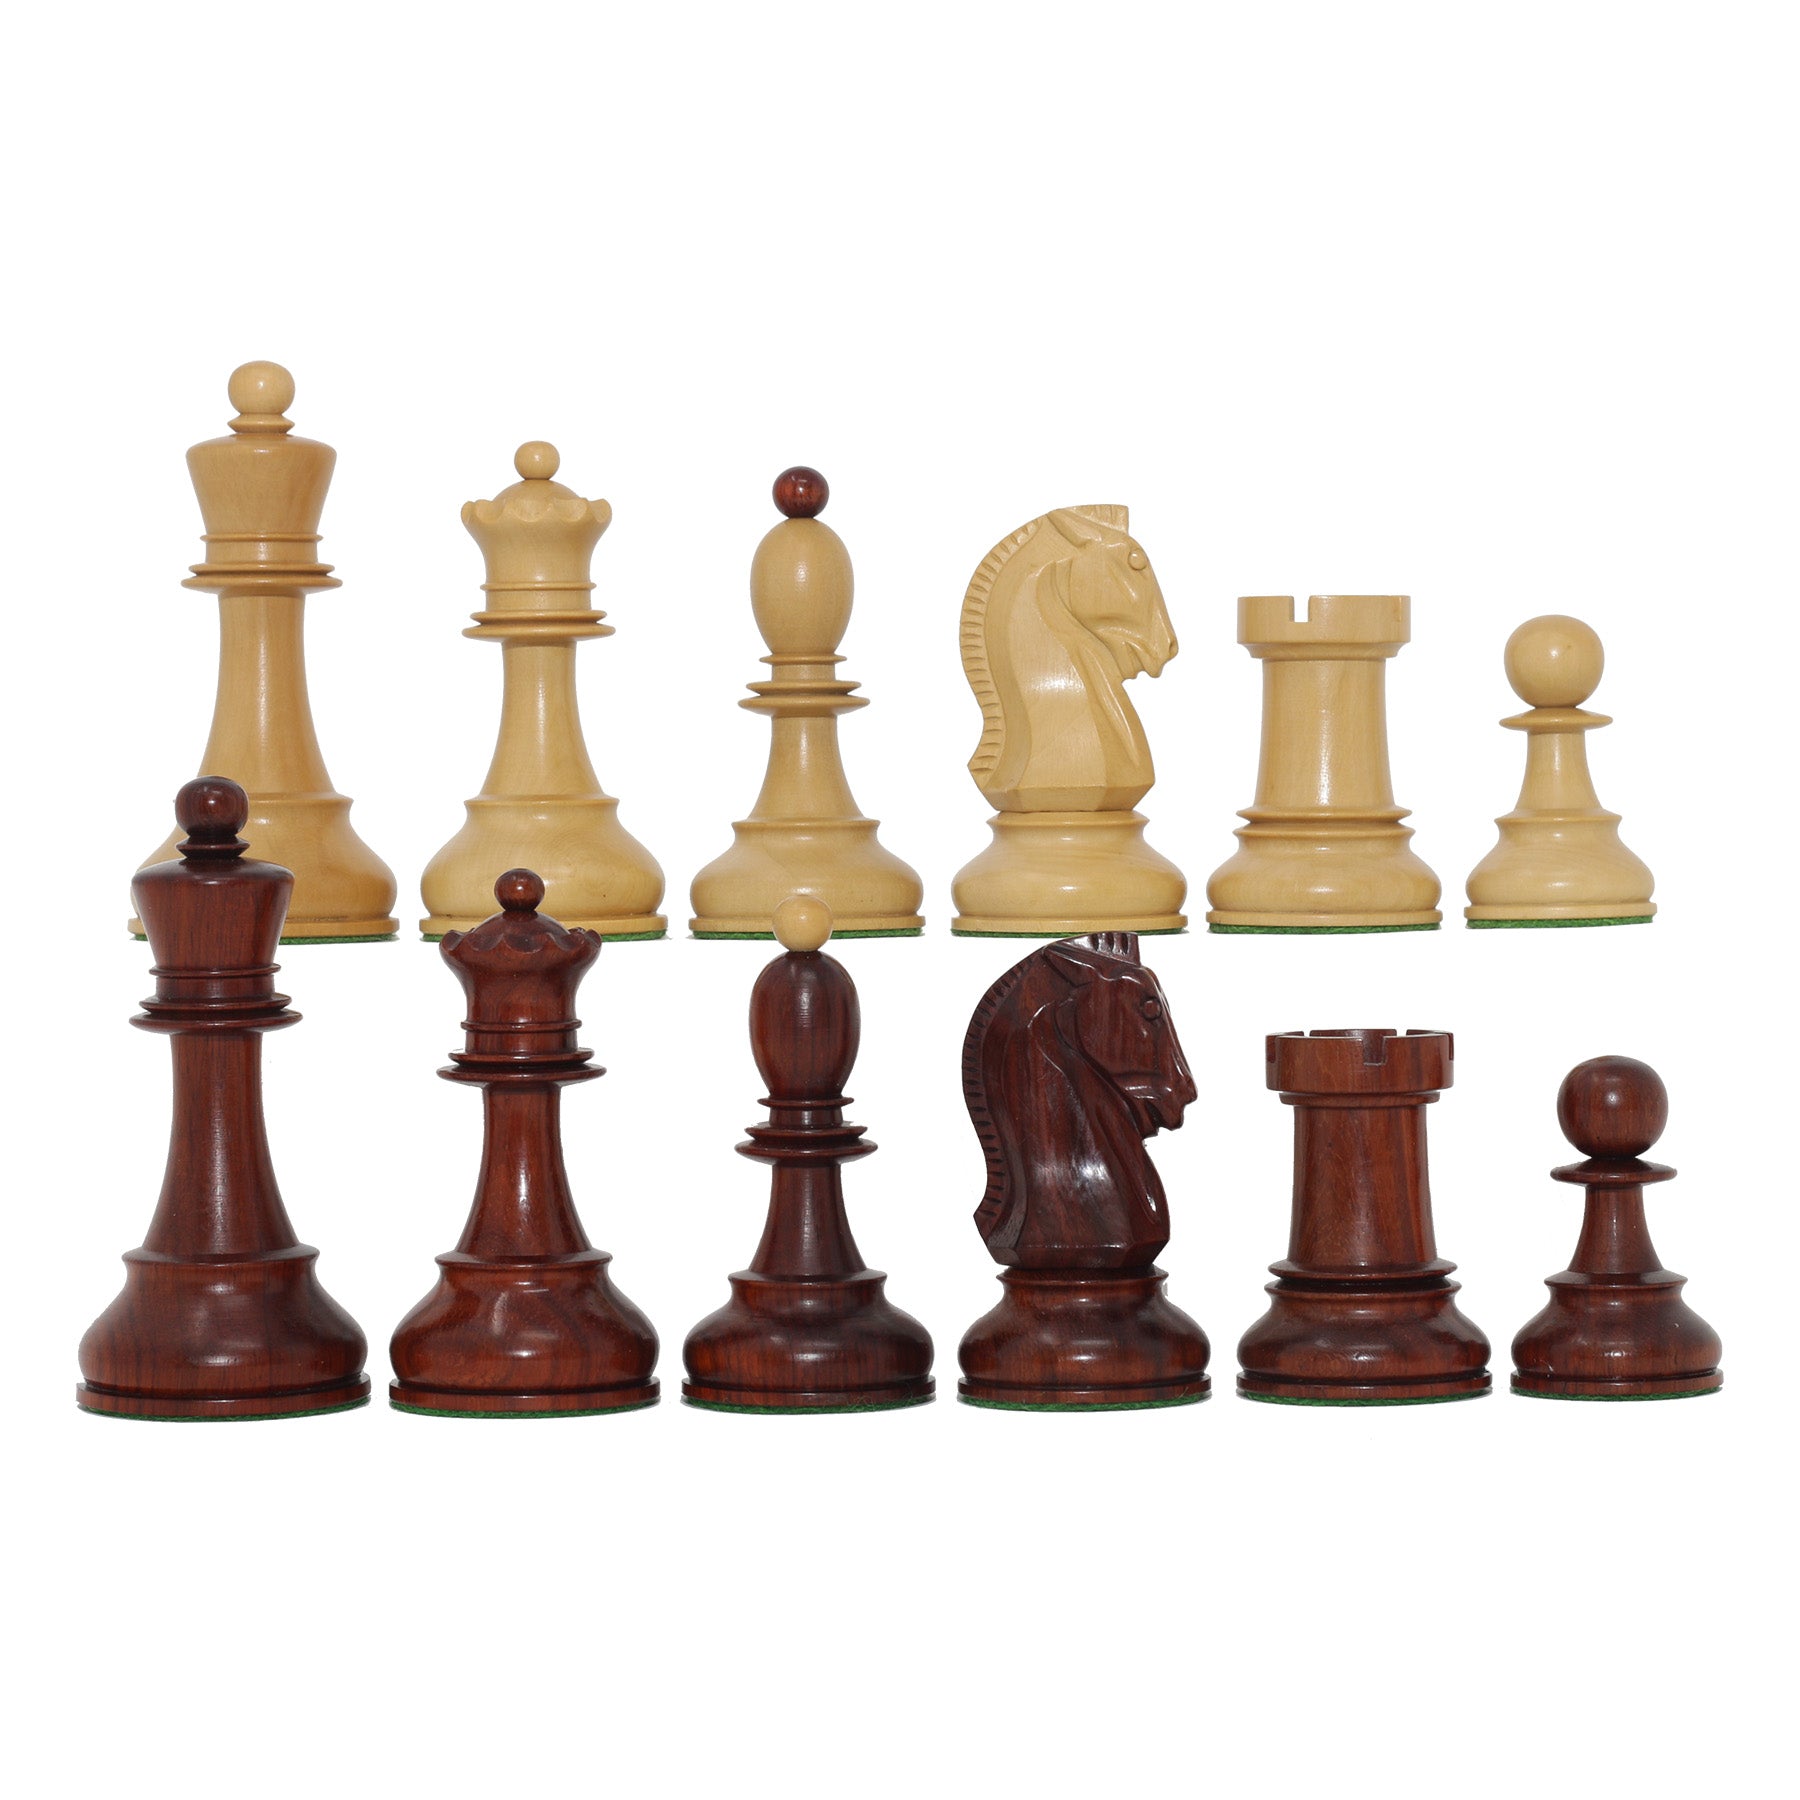 Dubrovnik 1950 Vintage 3.75" Reproduction Chess Set in Padouk Wood